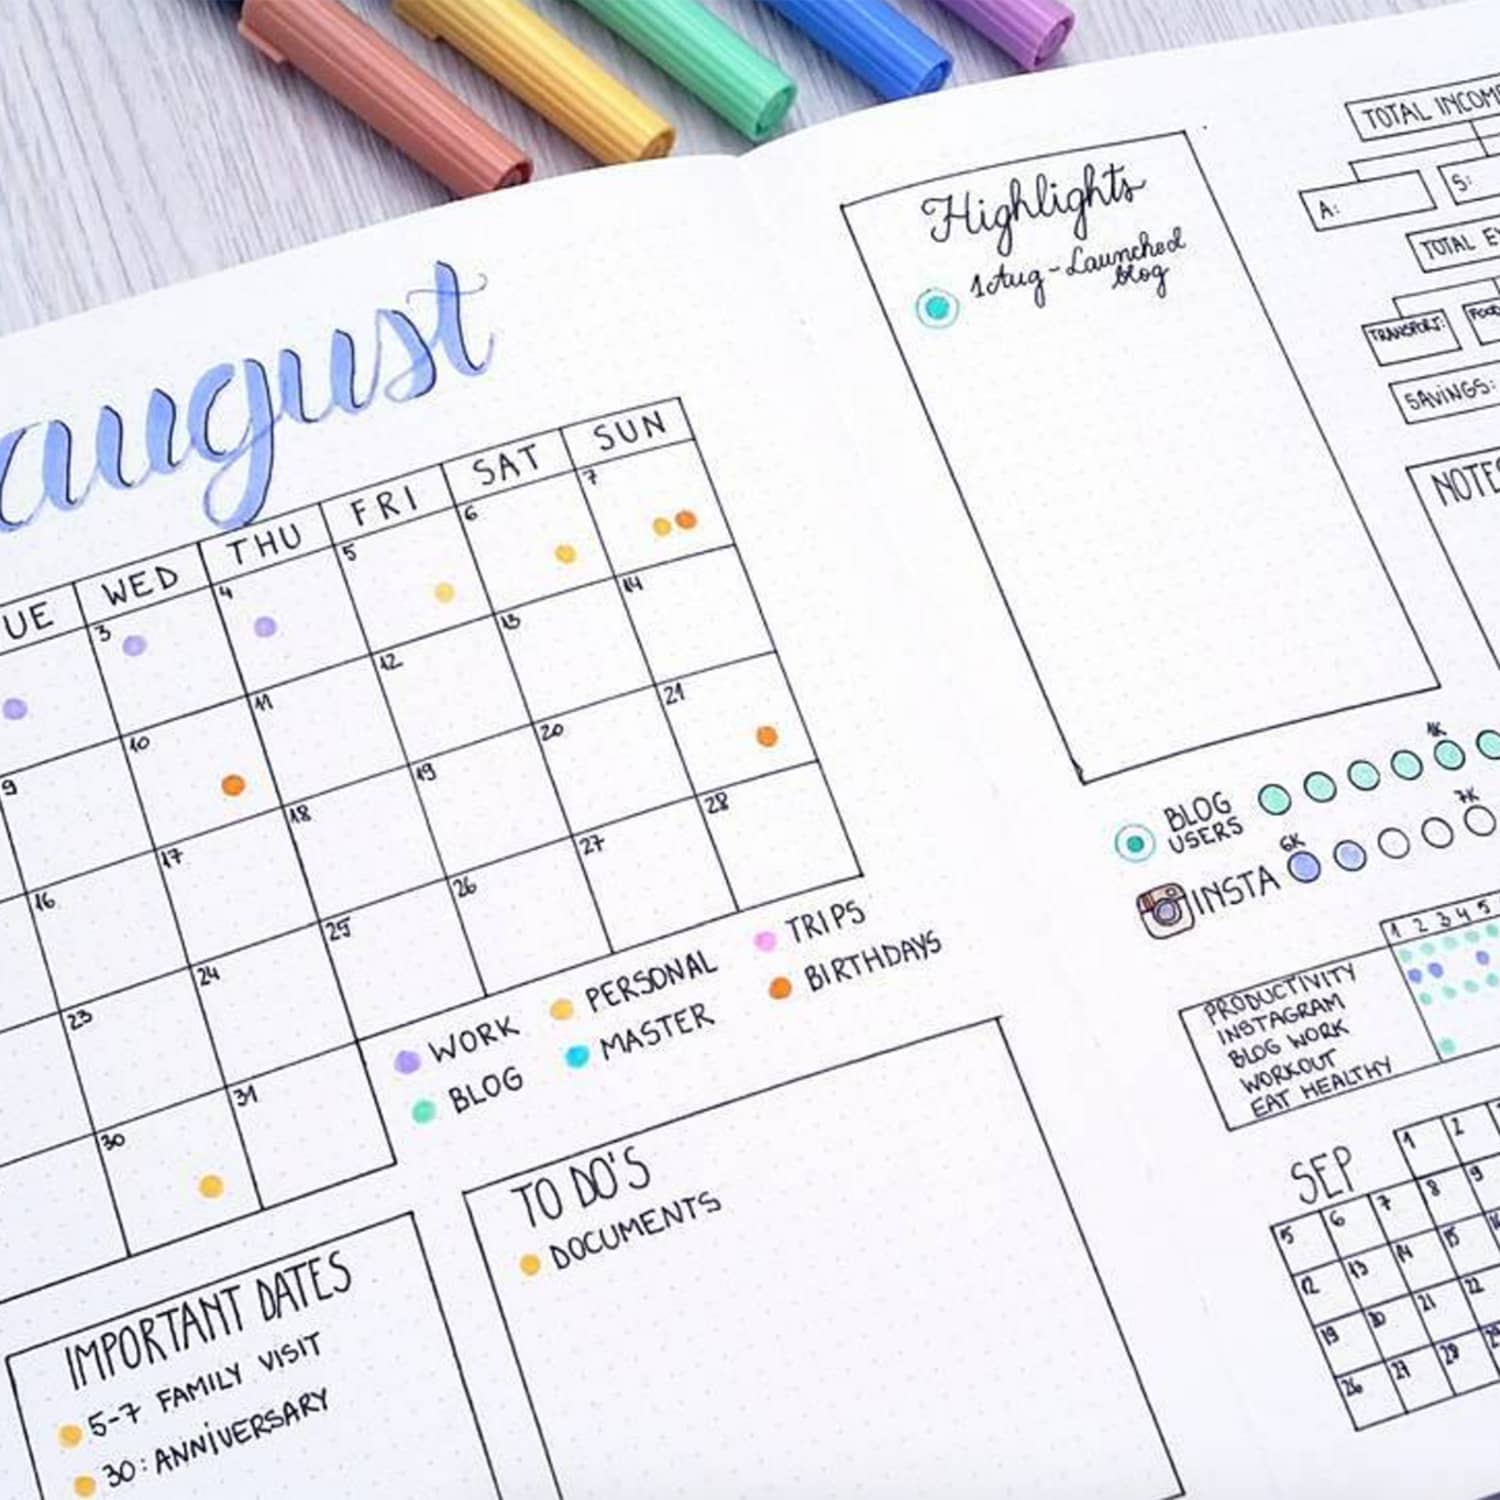 Bullet Journal On A Budget: The Best Bullet Journal Accessories